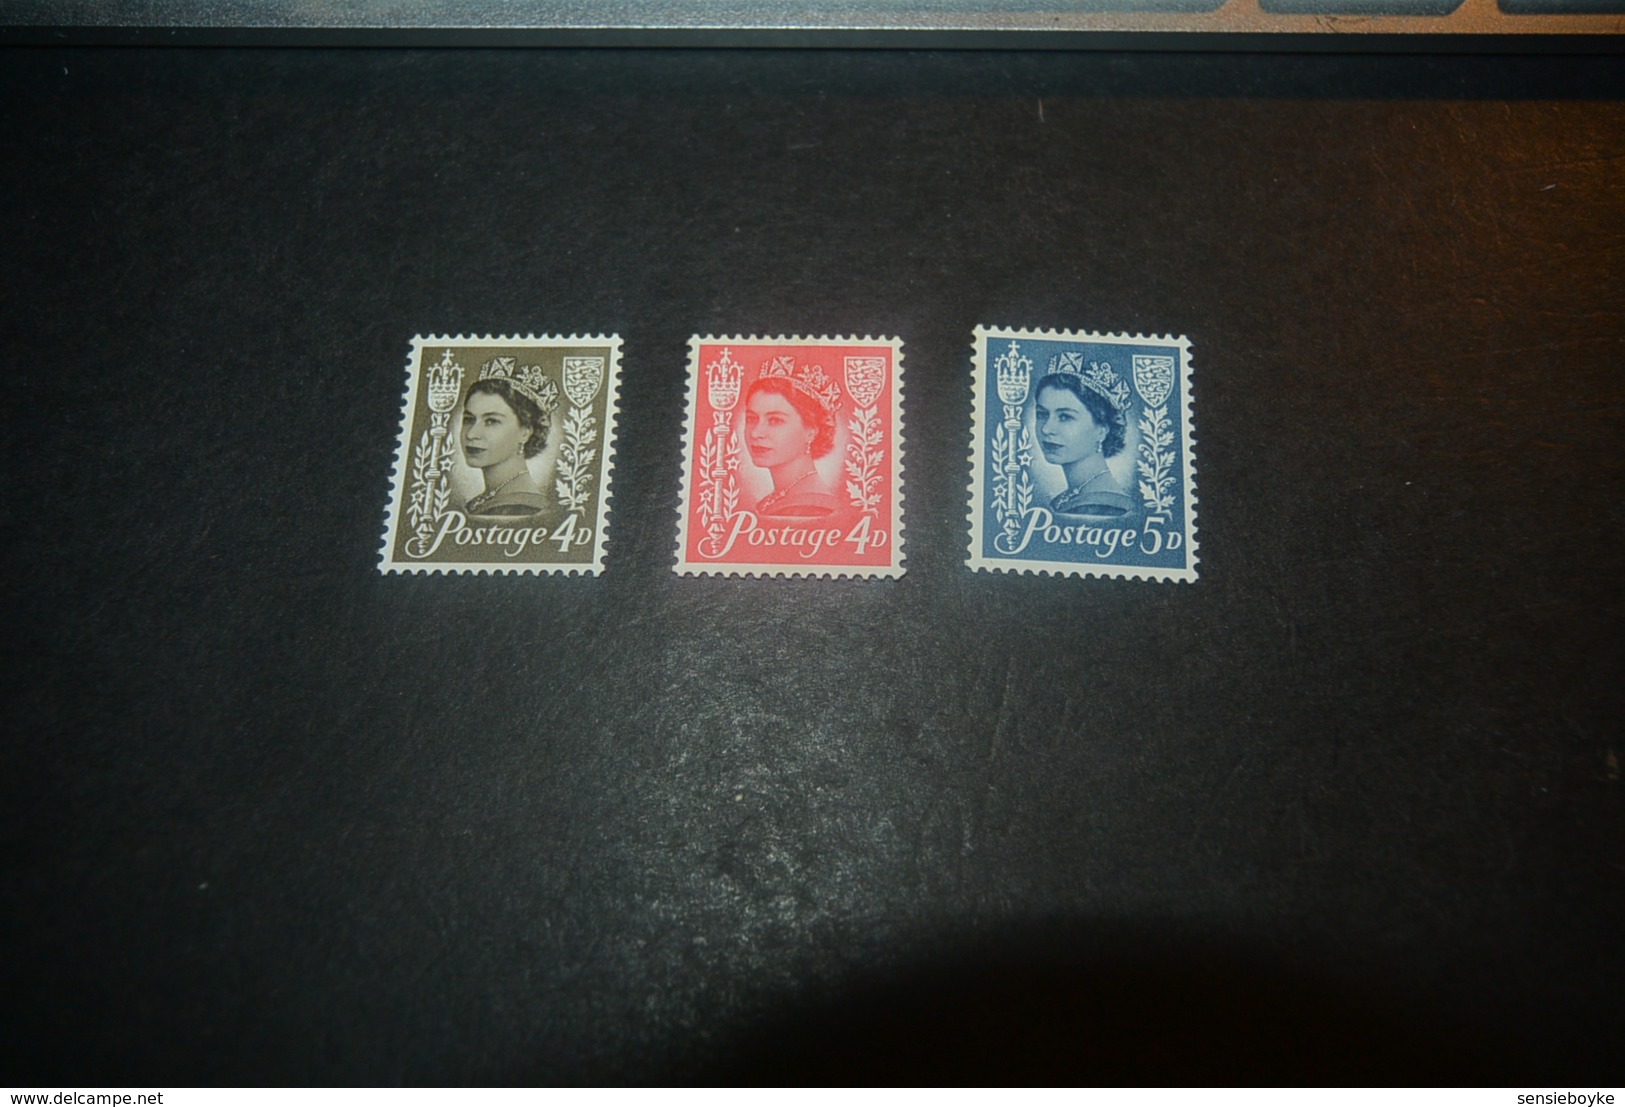 K23150 Stamps MNH Jersey 1968 -69 - SC. 4-6 - Royal Mace And Arms - Jersey